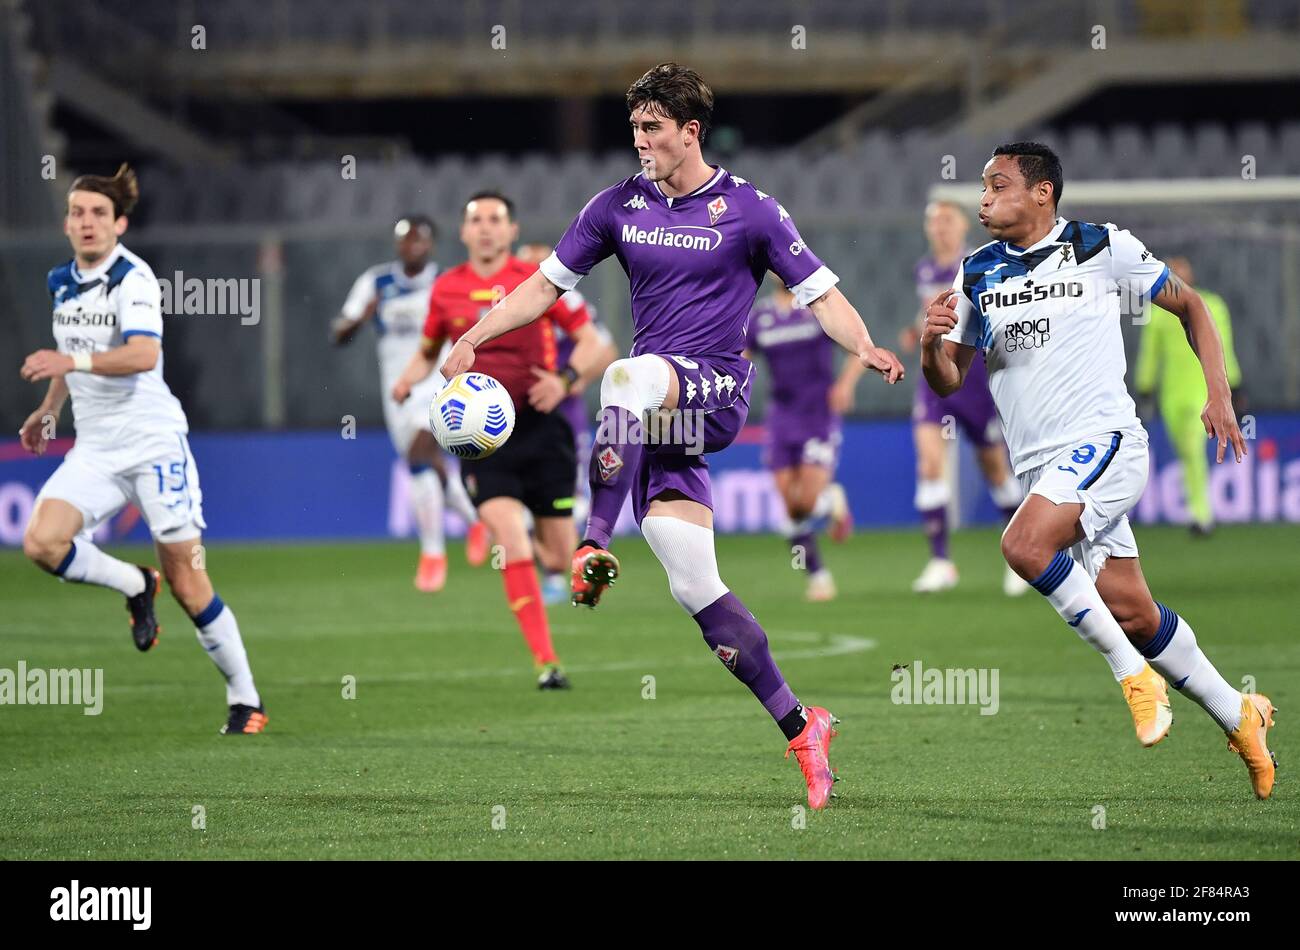 Florence, Italy. 11th Apr, 2021. Dusan Vlahovic of ACF Fiorentina and Luis  Muriel of Atalanta BC in action during the Serie A football match between  ACF Fiorentina and Atalanta Bergamasca Calcio at